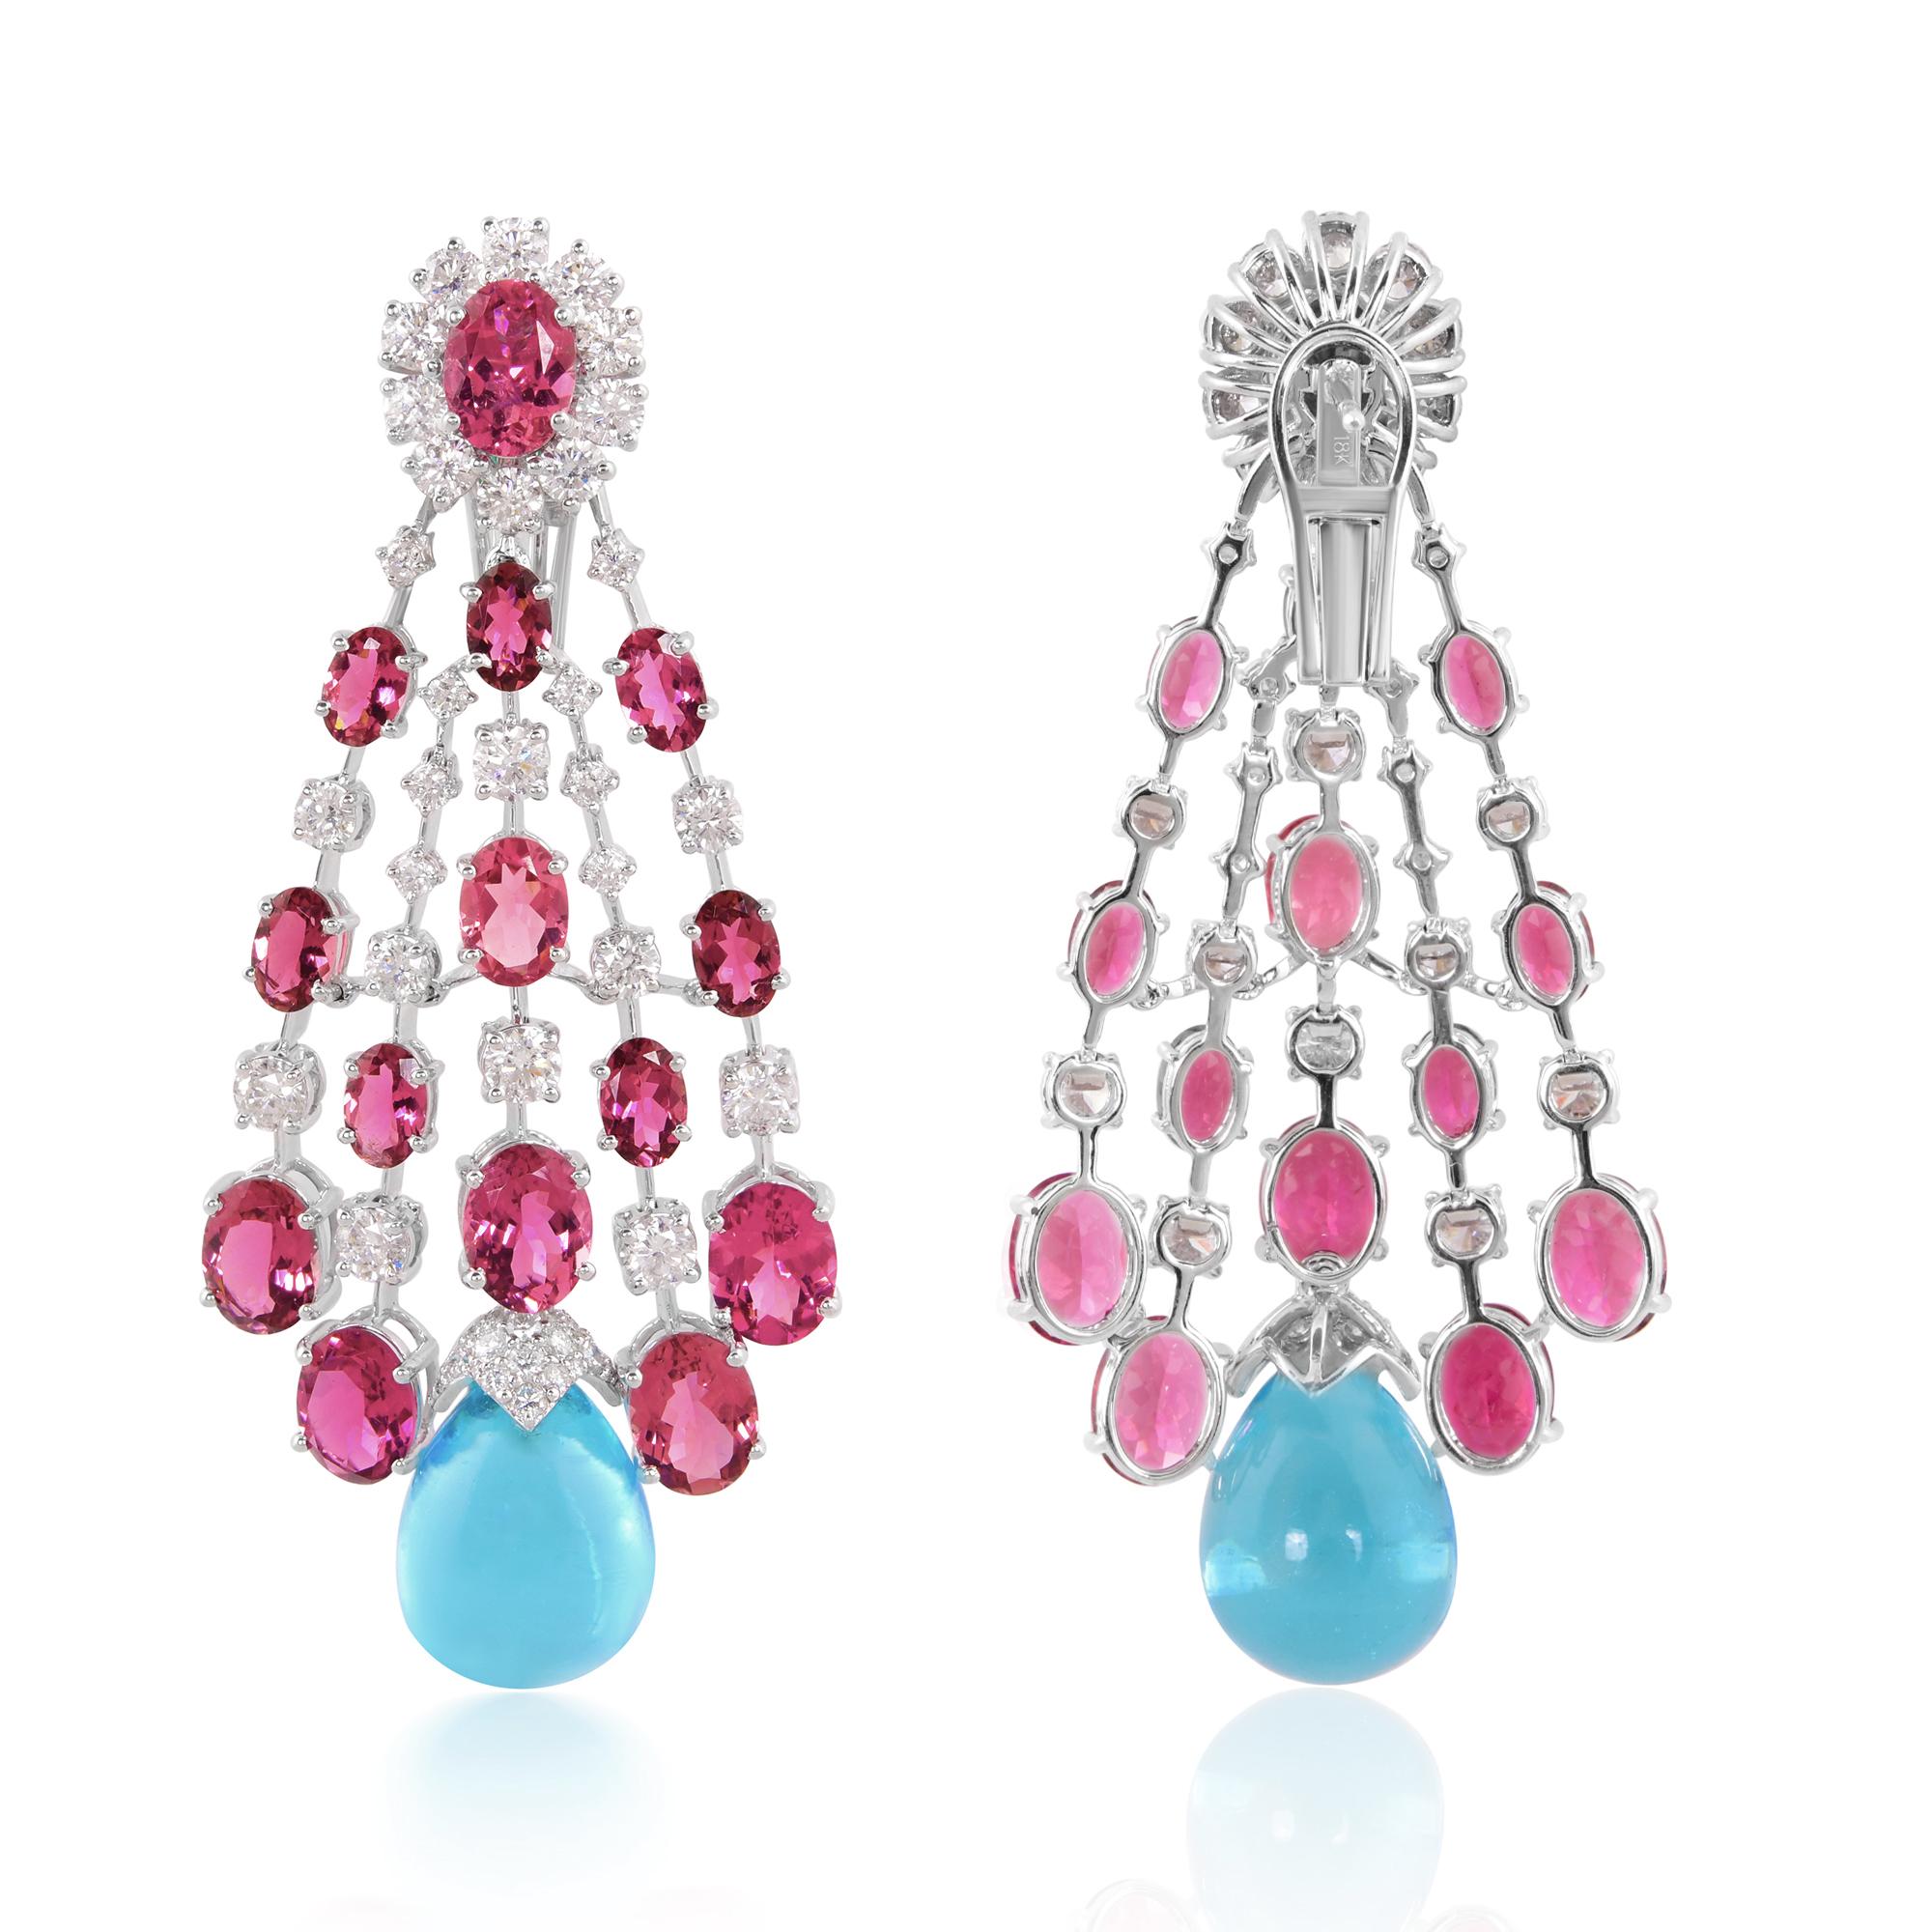 The focal point of these earrings is the enchanting Tourmaline Blue Topaz gemstones, radiating a captivating hue reminiscent of tranquil ocean depths. Their elongated dangle design ensures graceful movement with every turn, catching the light and